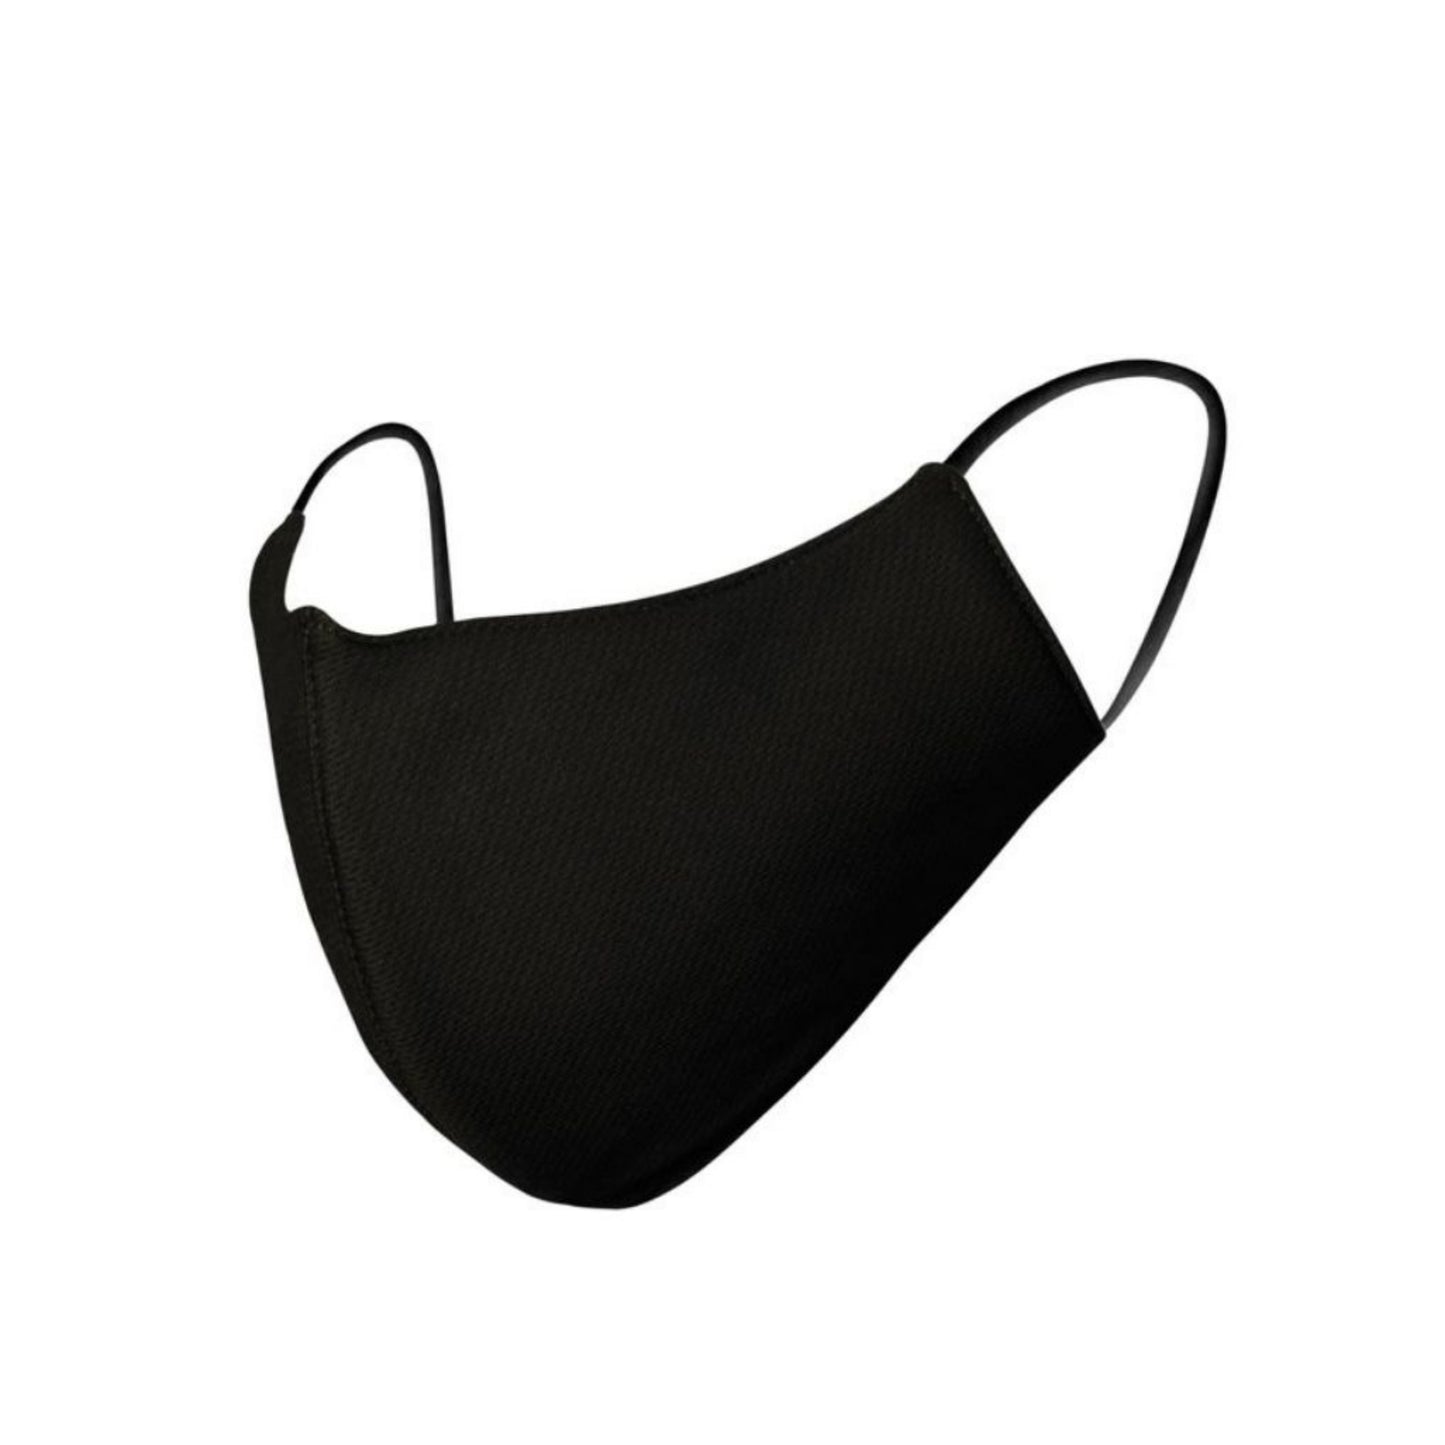 Black 3-ply face mask made from polyester and cotton with black elasticated ear loops